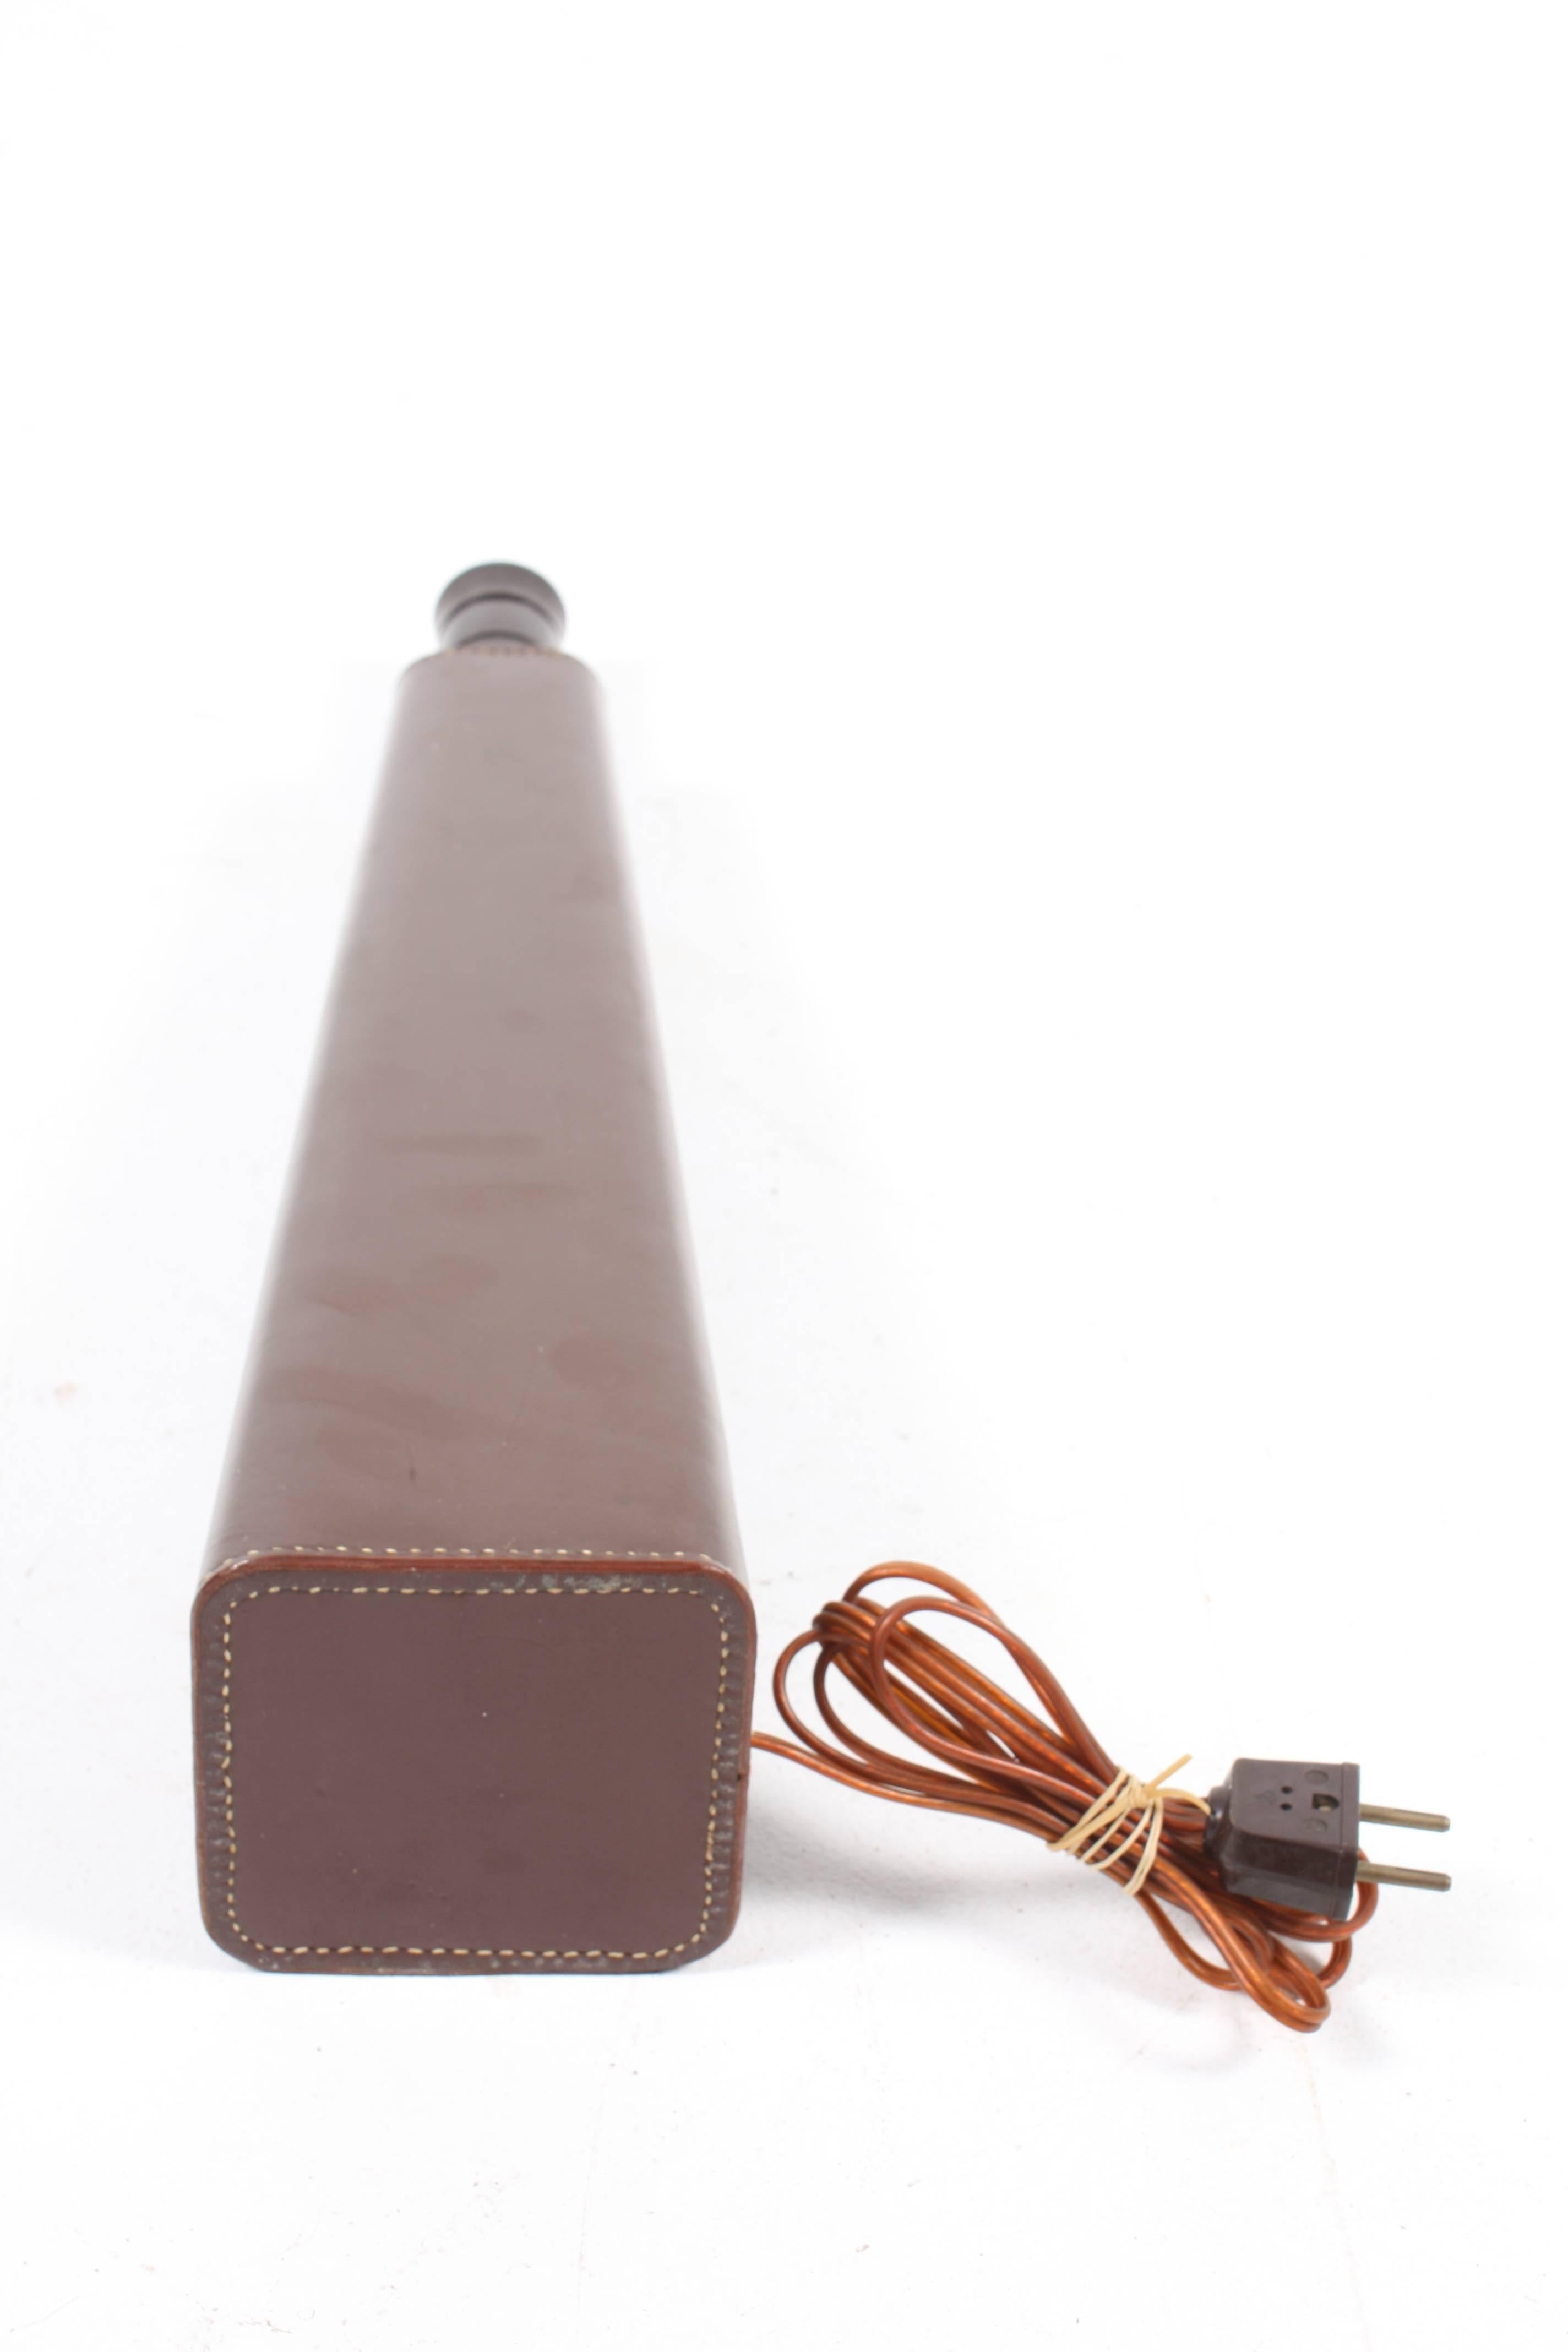 Mid-20th Century Table Lamp in Leather by Illums Bolighus For Sale